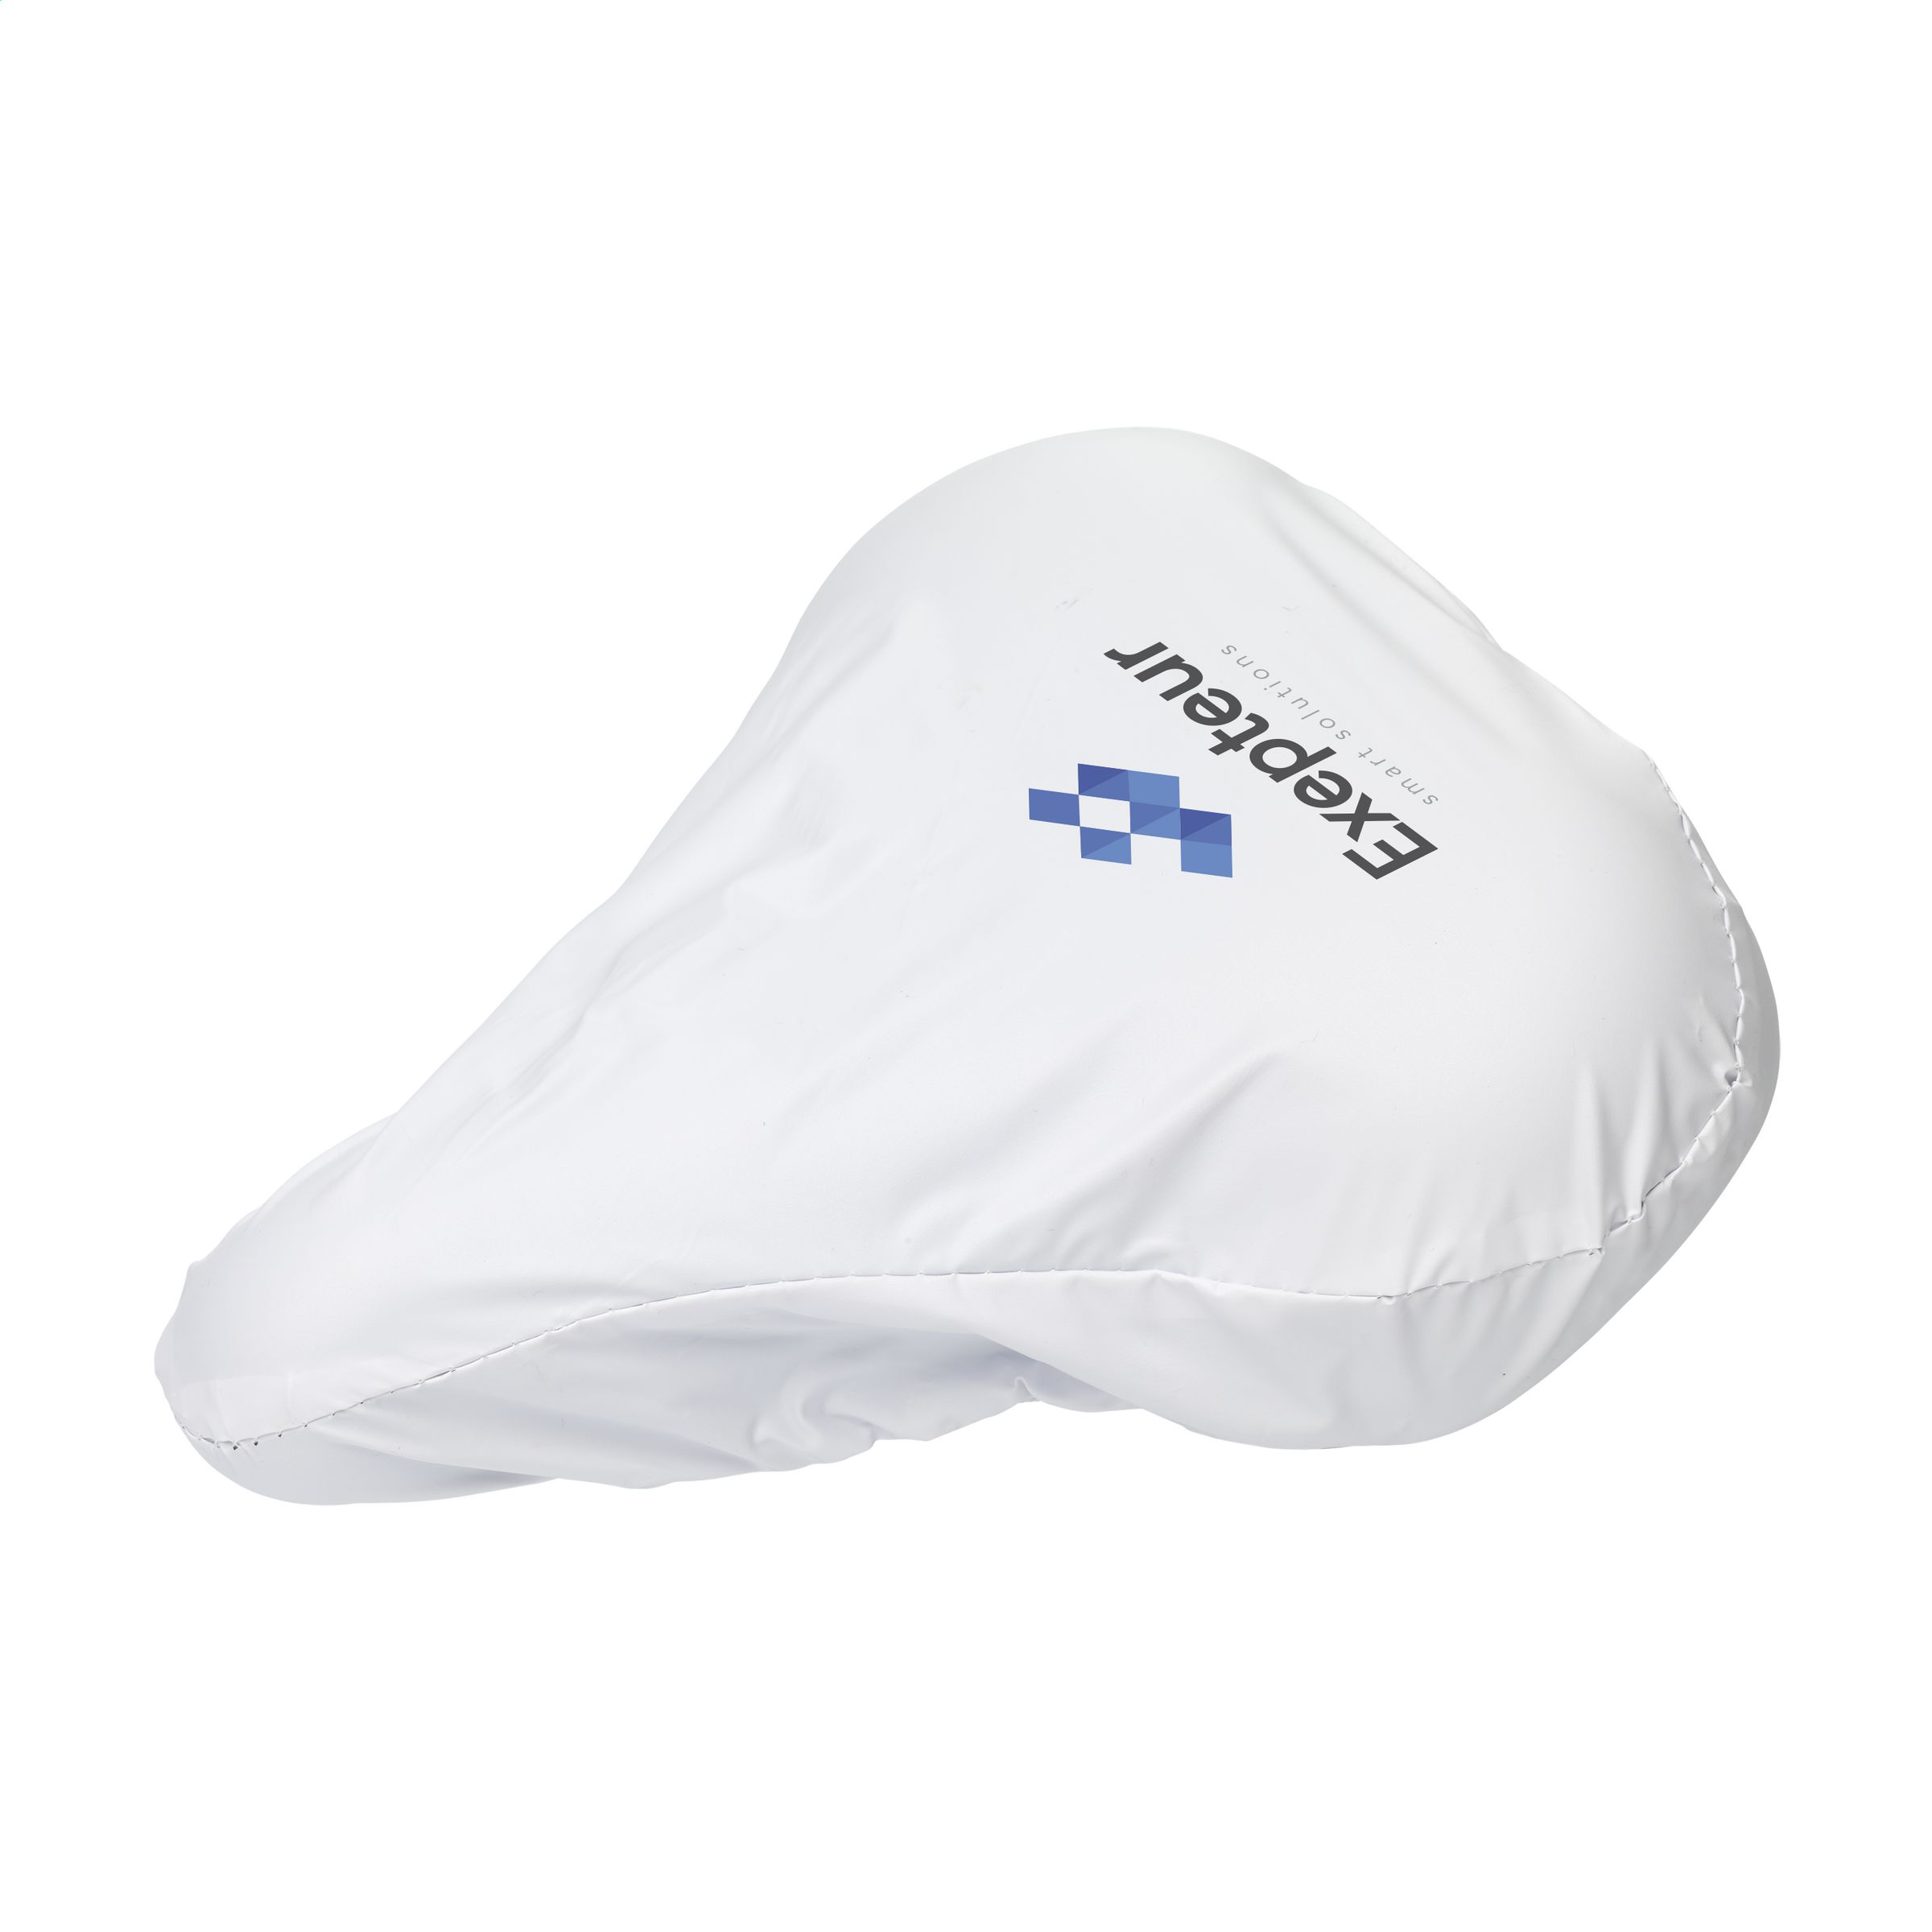 Recycled PVC Bicycle Seat Cover - Blackley